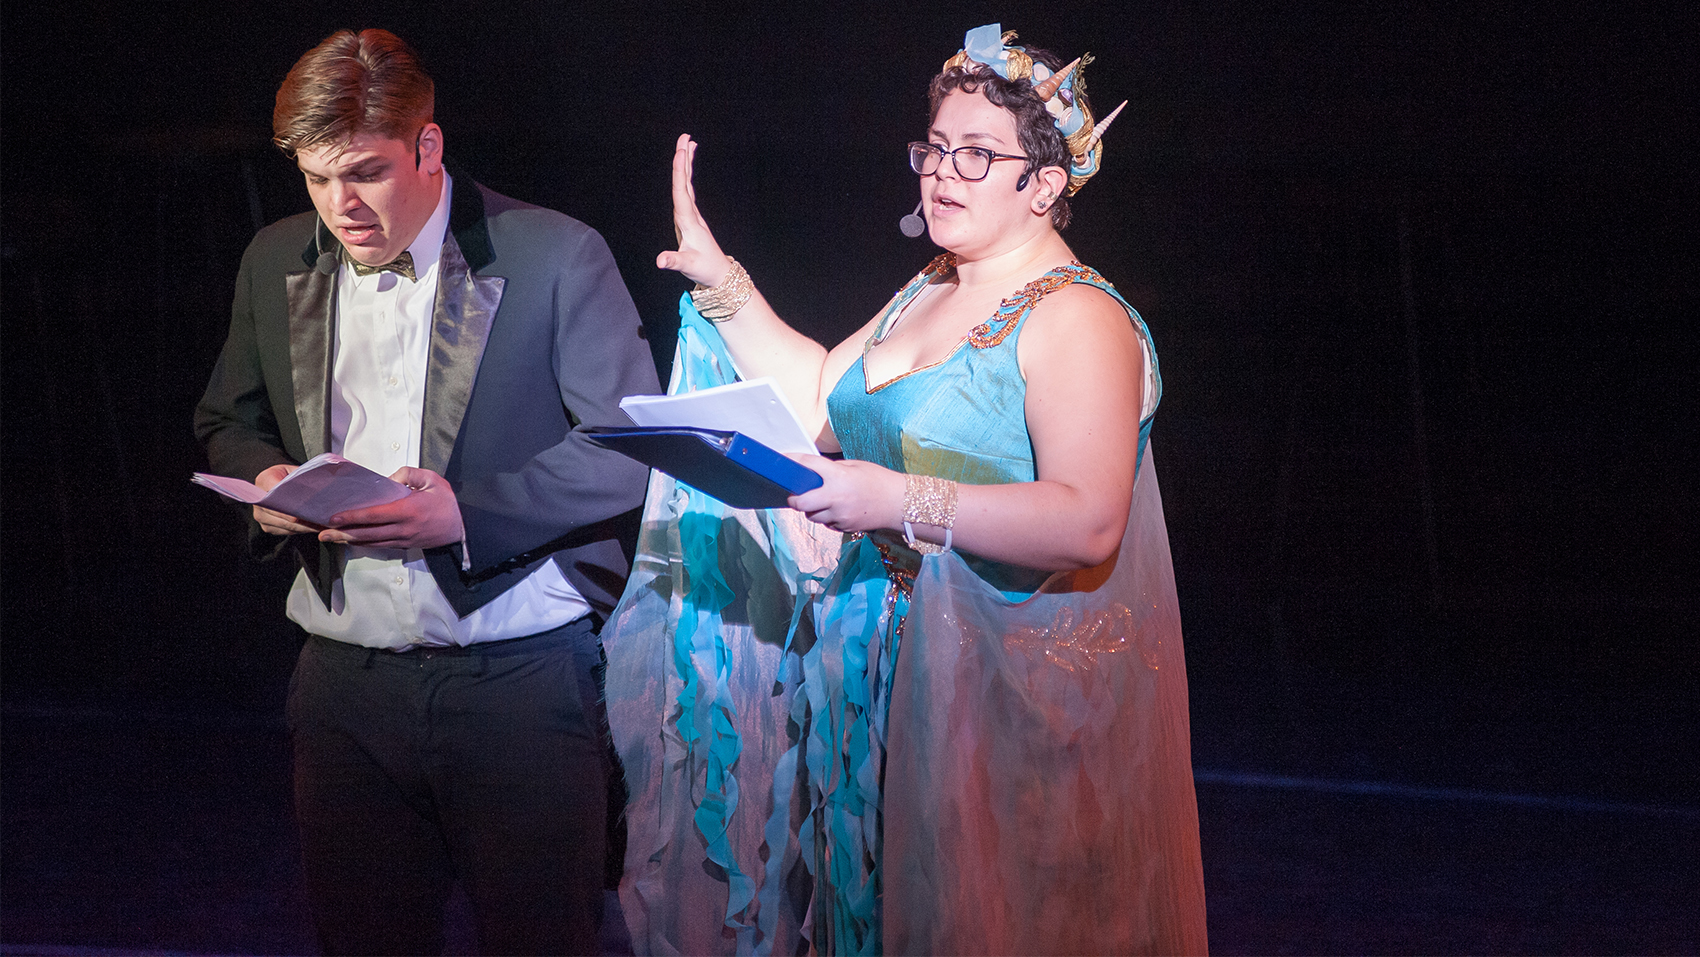 A young man in a tuxedo looked hurried, reading off of a script. A young woman in a seashell crown and blue flowy dress and cuffed glittery wings holds a blue binder and script in her left hand, her right pressed outward in a stopping motion at the young man standing beside her.  